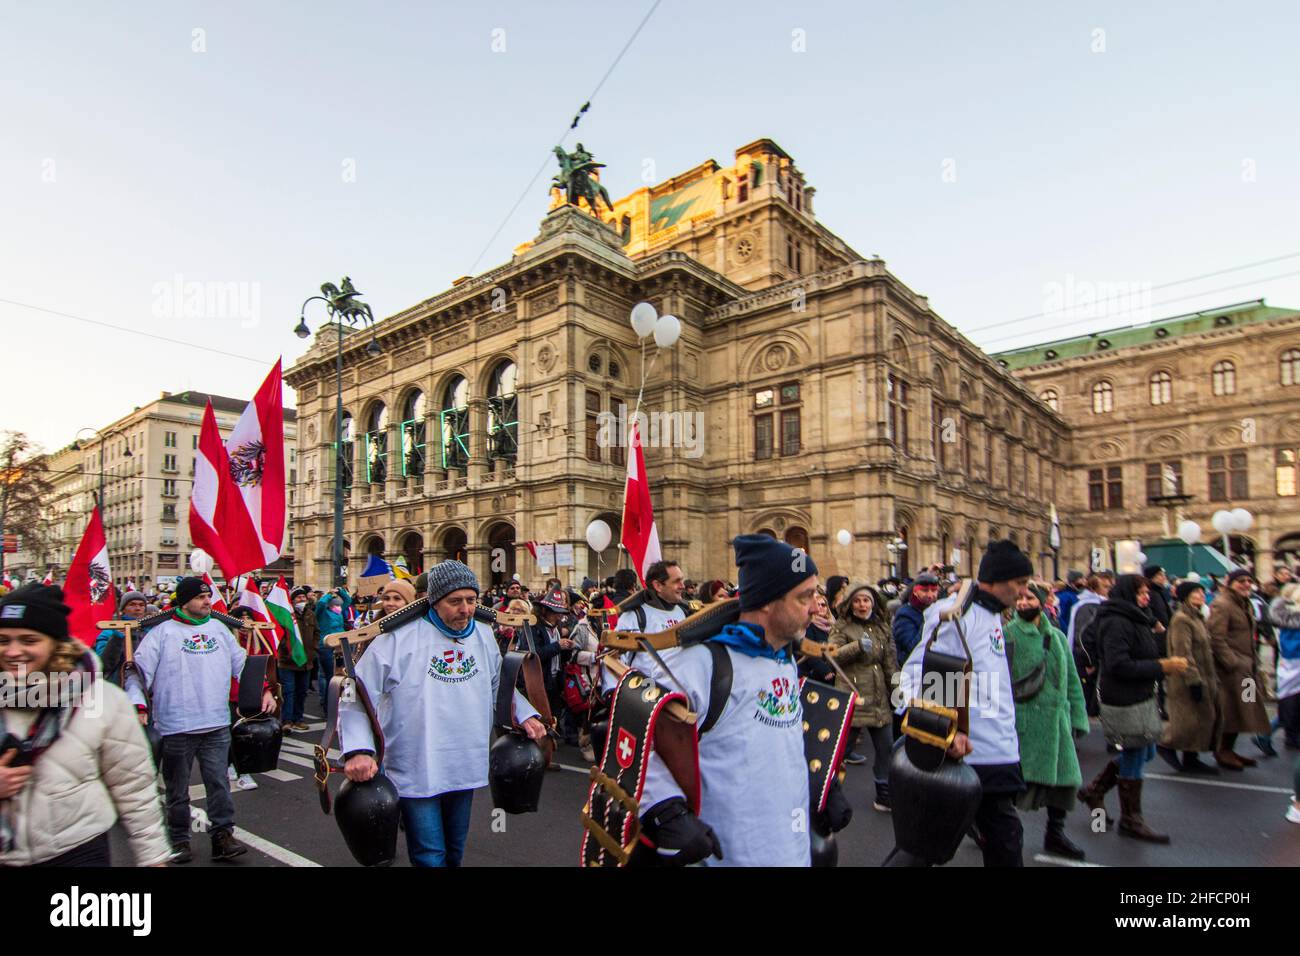 Wien, Vienna: men with cow bells from Vorarlberg, Corona protest demonstration in front of opera Staatsoper, opponents of the corona measures march, m Stock Photo